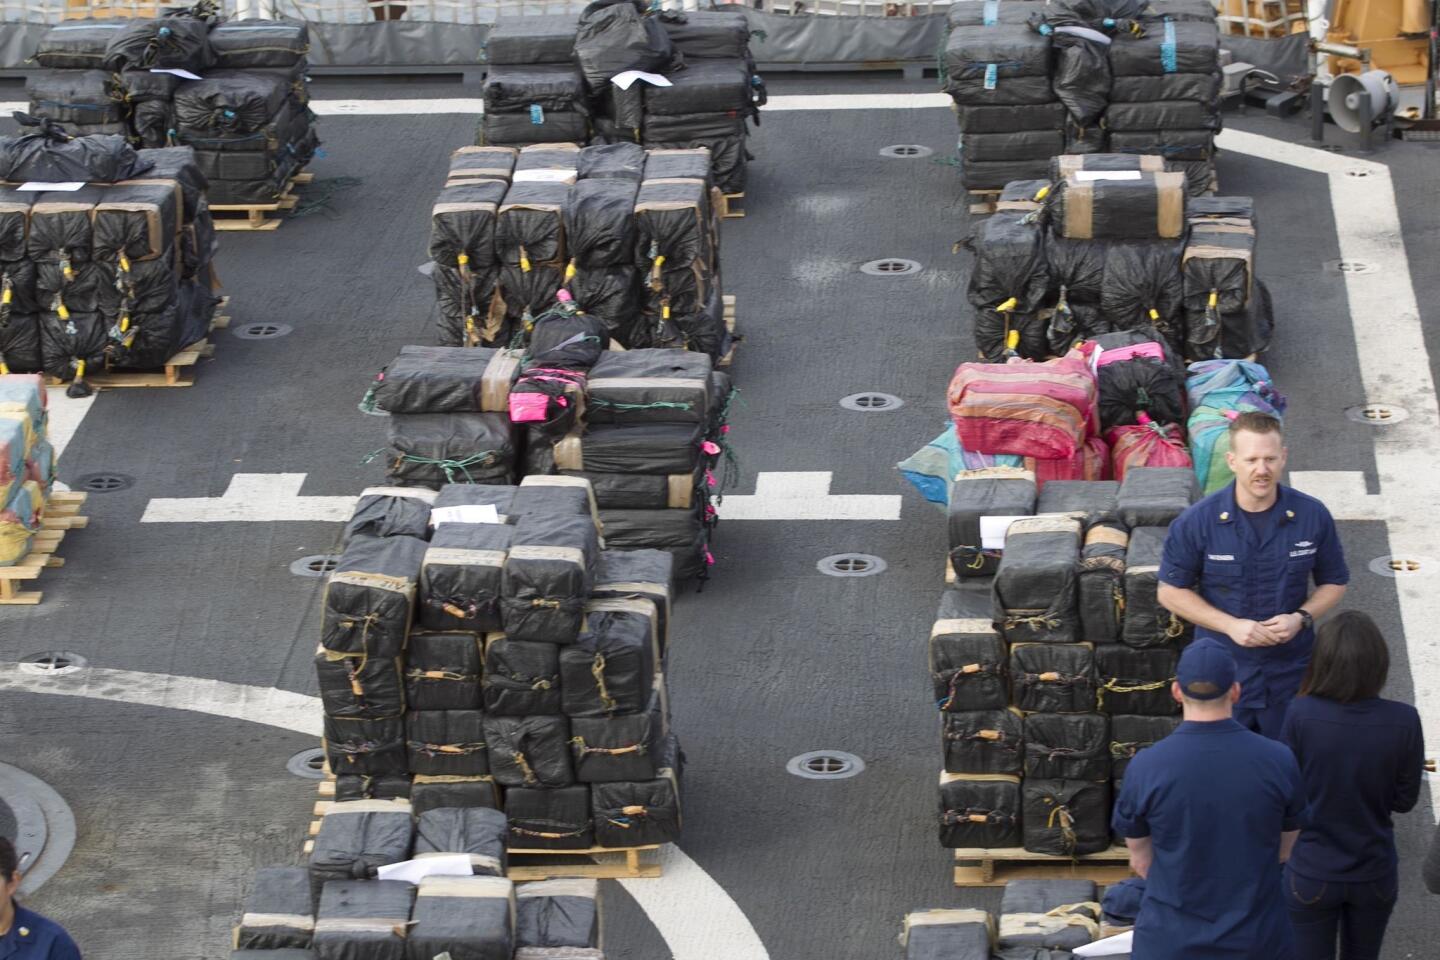 The flight deck of the USCG Cutter Stratton, which participated in the operation, had the drugs staged for unloading.